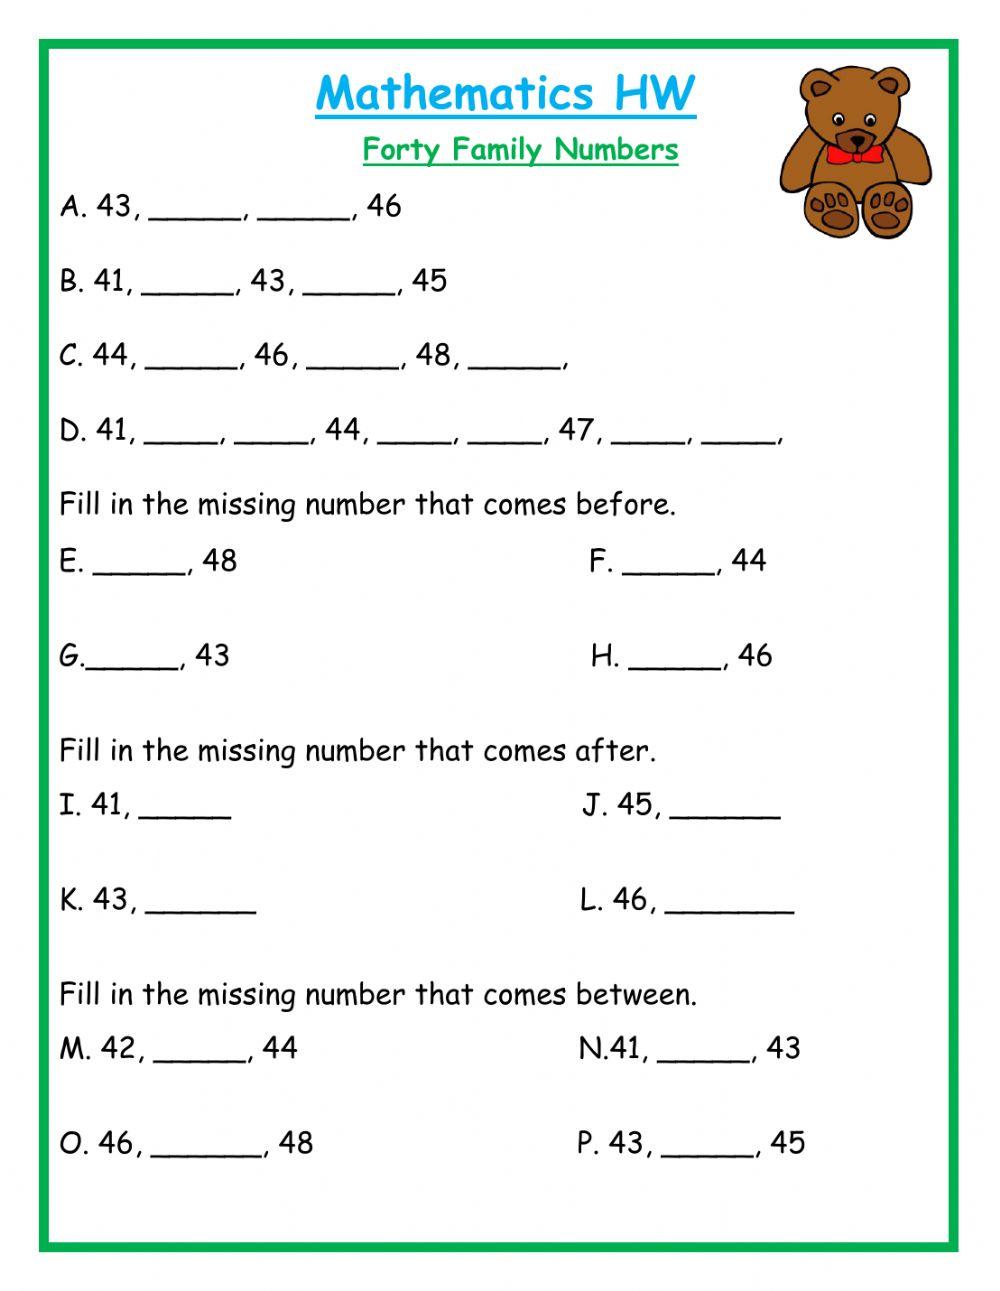 Fill in the missing number Forty Family HW